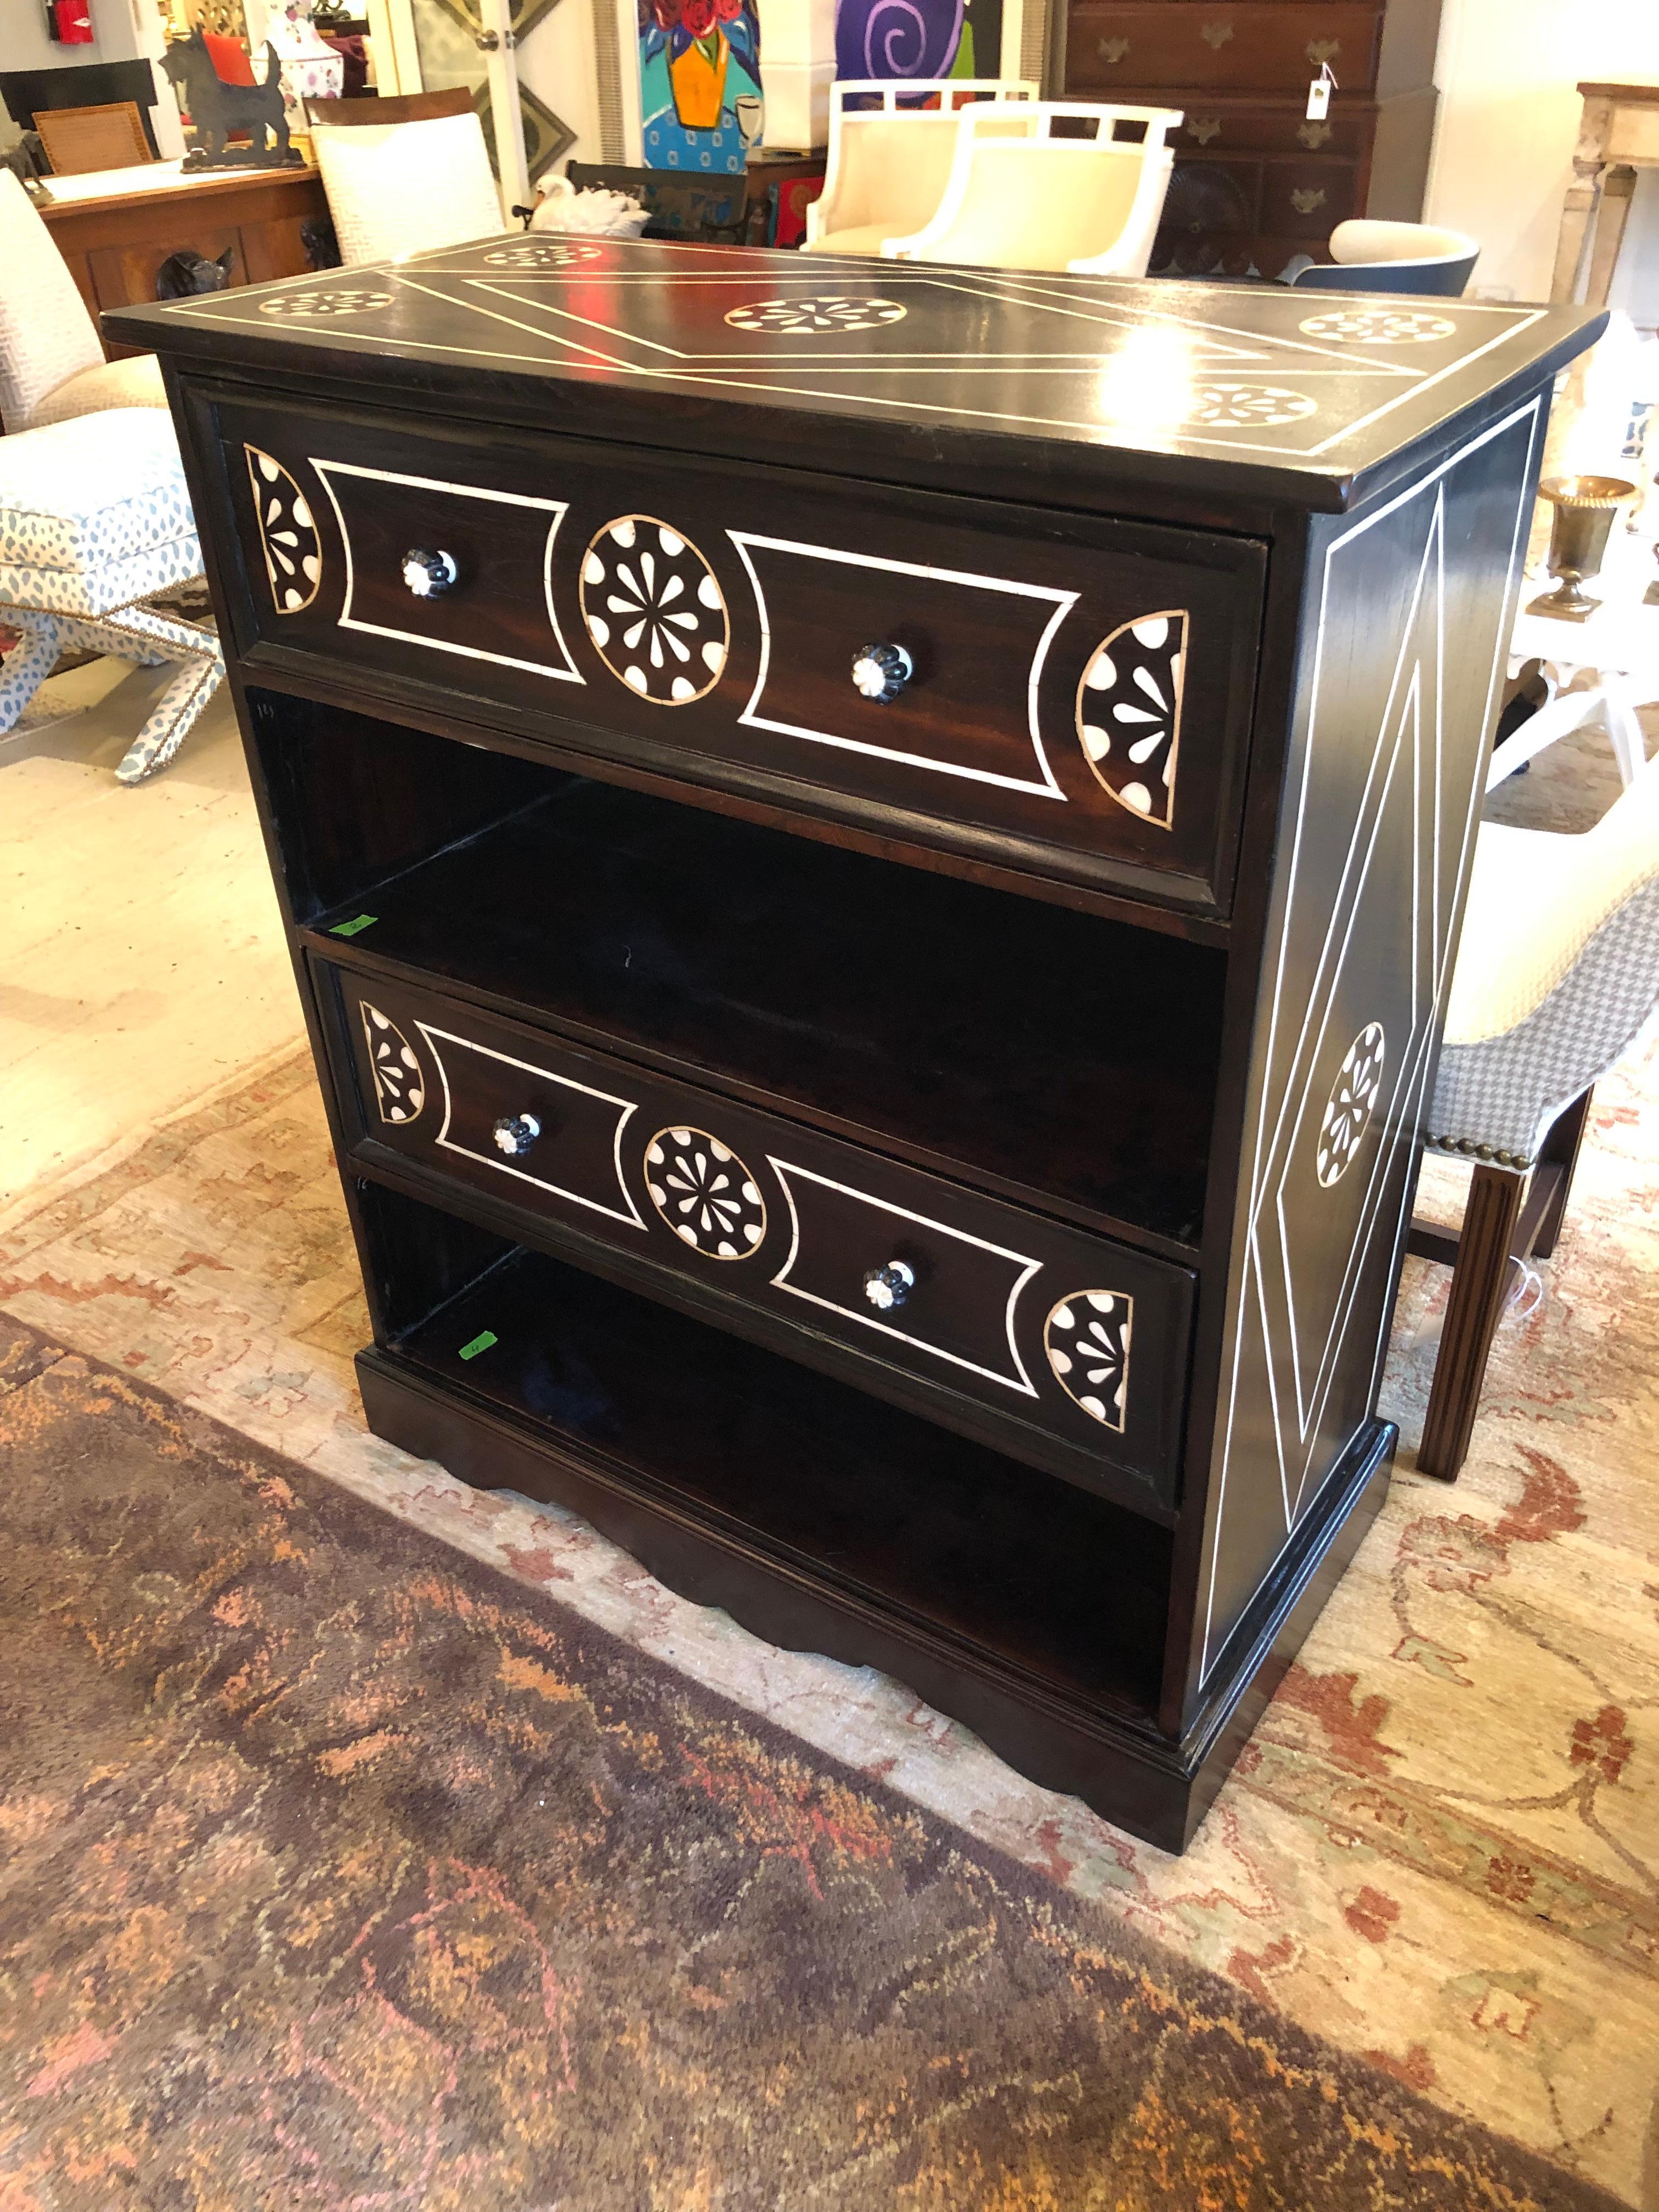 Magnificent strikingly graphic black and white dresser having ebonized wood with some areas of wood grain visible and white flower-esque inlay decoration.  Knobs are lovely decorative black and white gems.